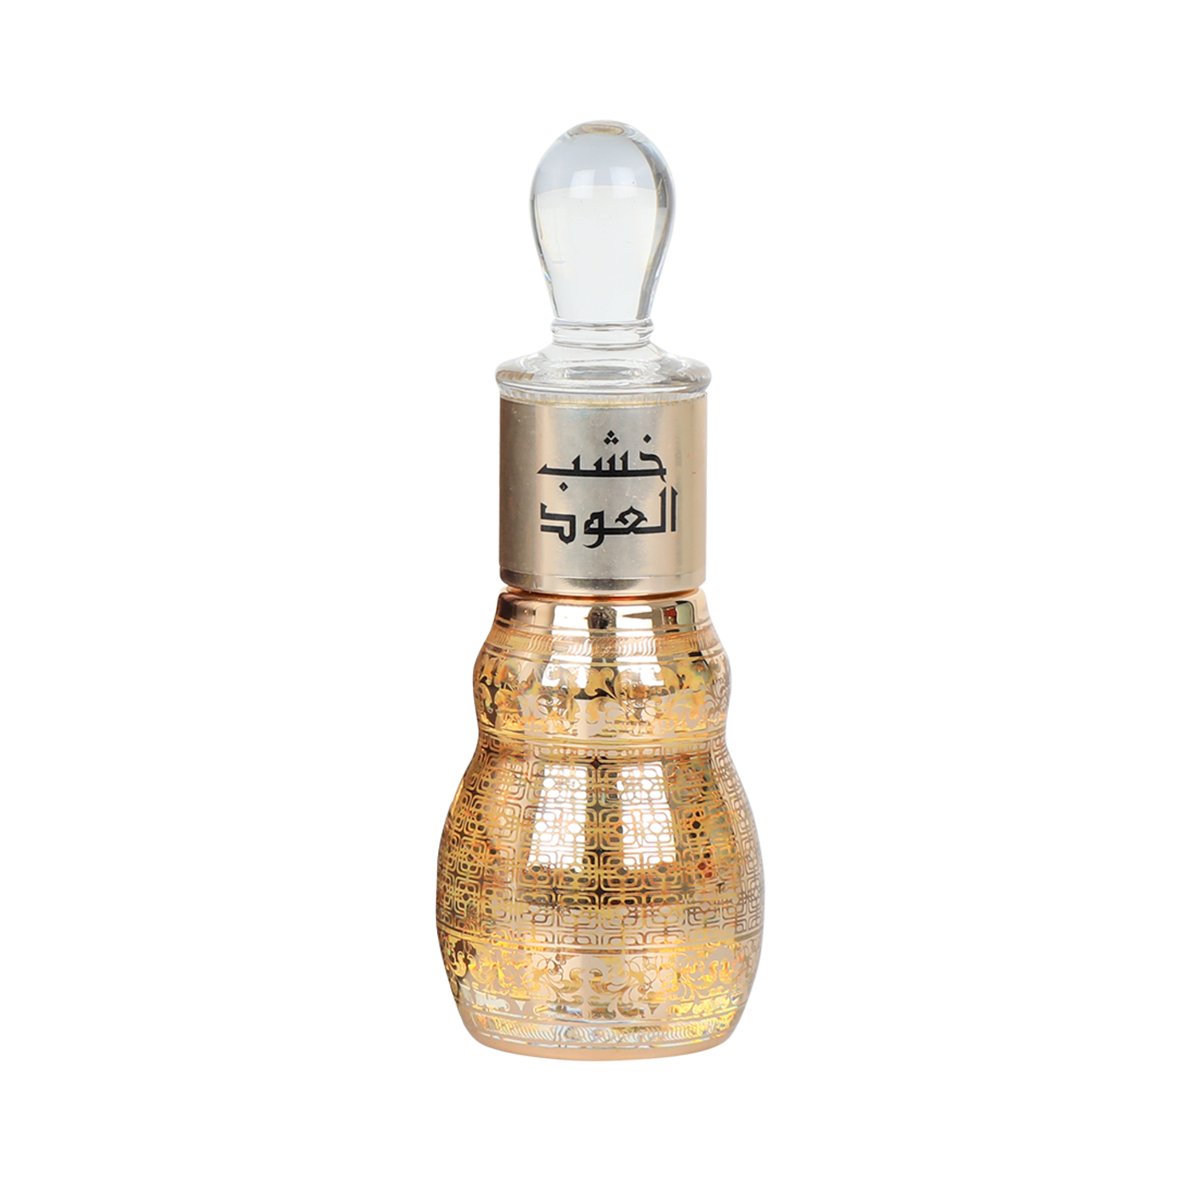 MABT Concentrated Perfume Oil Khashab Aloud, 24 ml